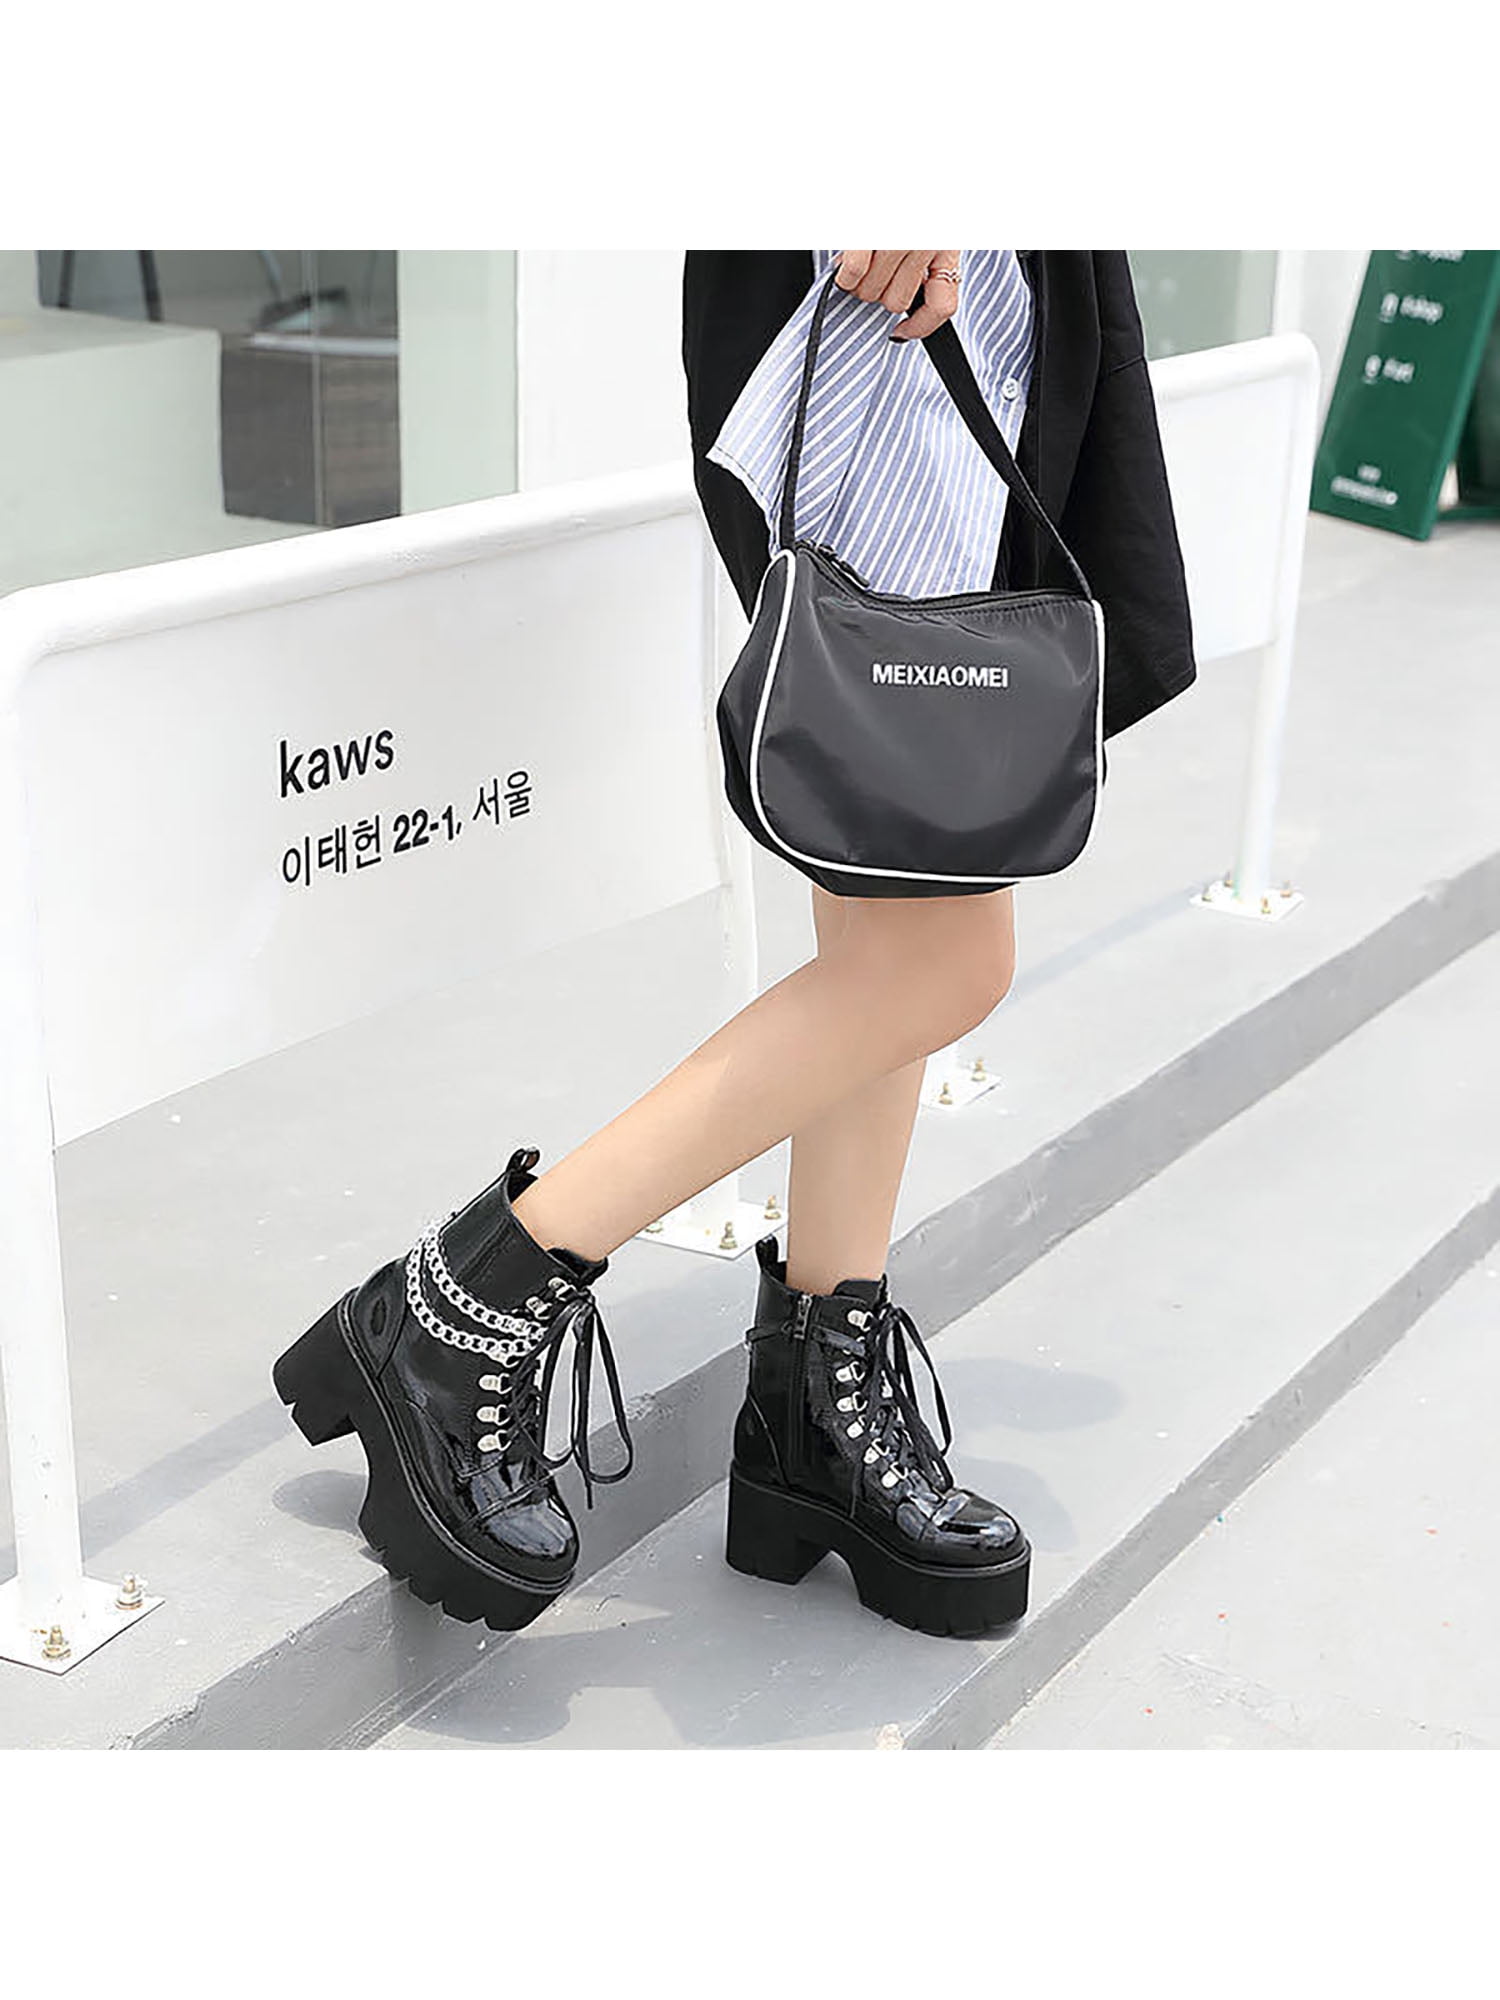 2016 Womens chunky heel platform lace-up punk goth creeper ankle boots  shoes